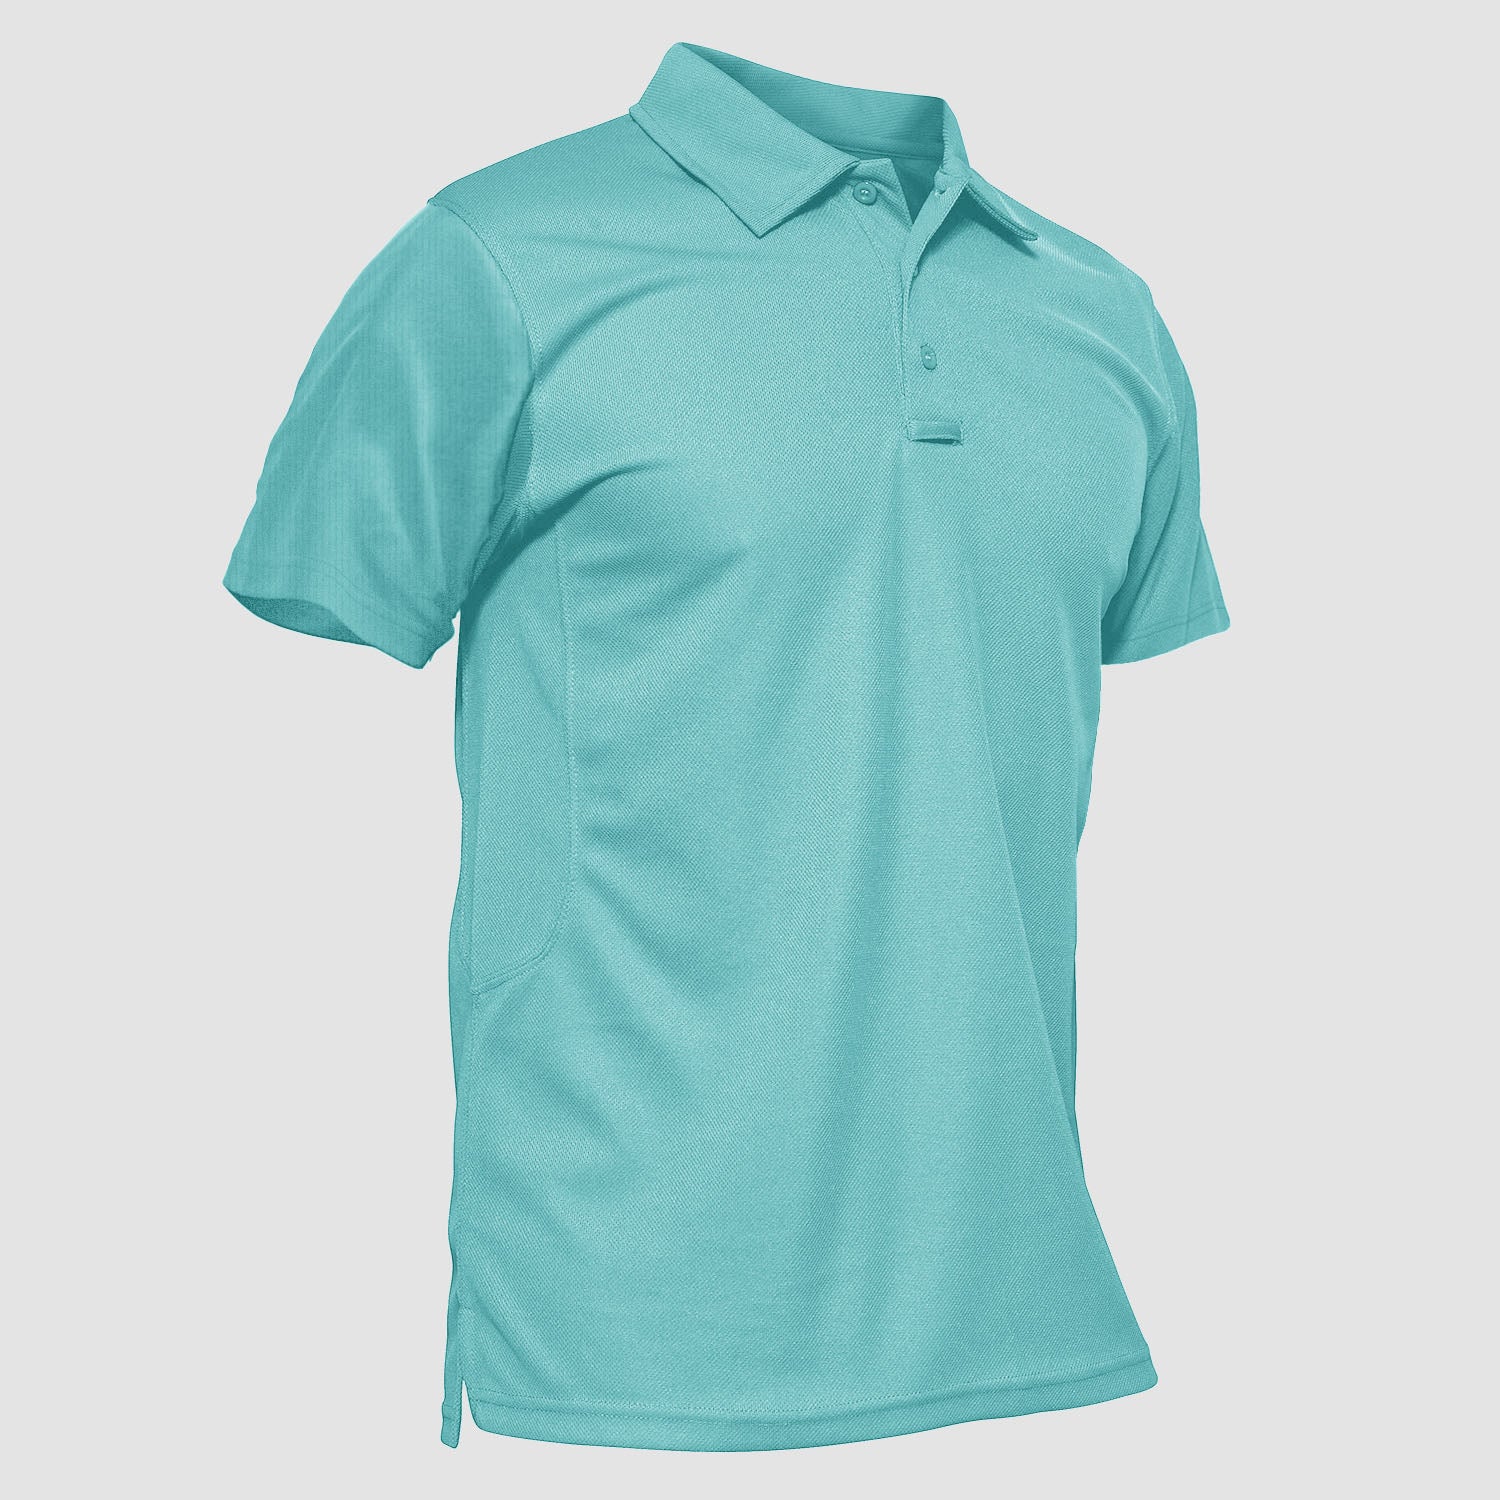 Designer Wholesale Cotton Golf Polos For Men For Men High Quality Polyester  Tee For Sports And Fashion From Fashionfirst, $18.28